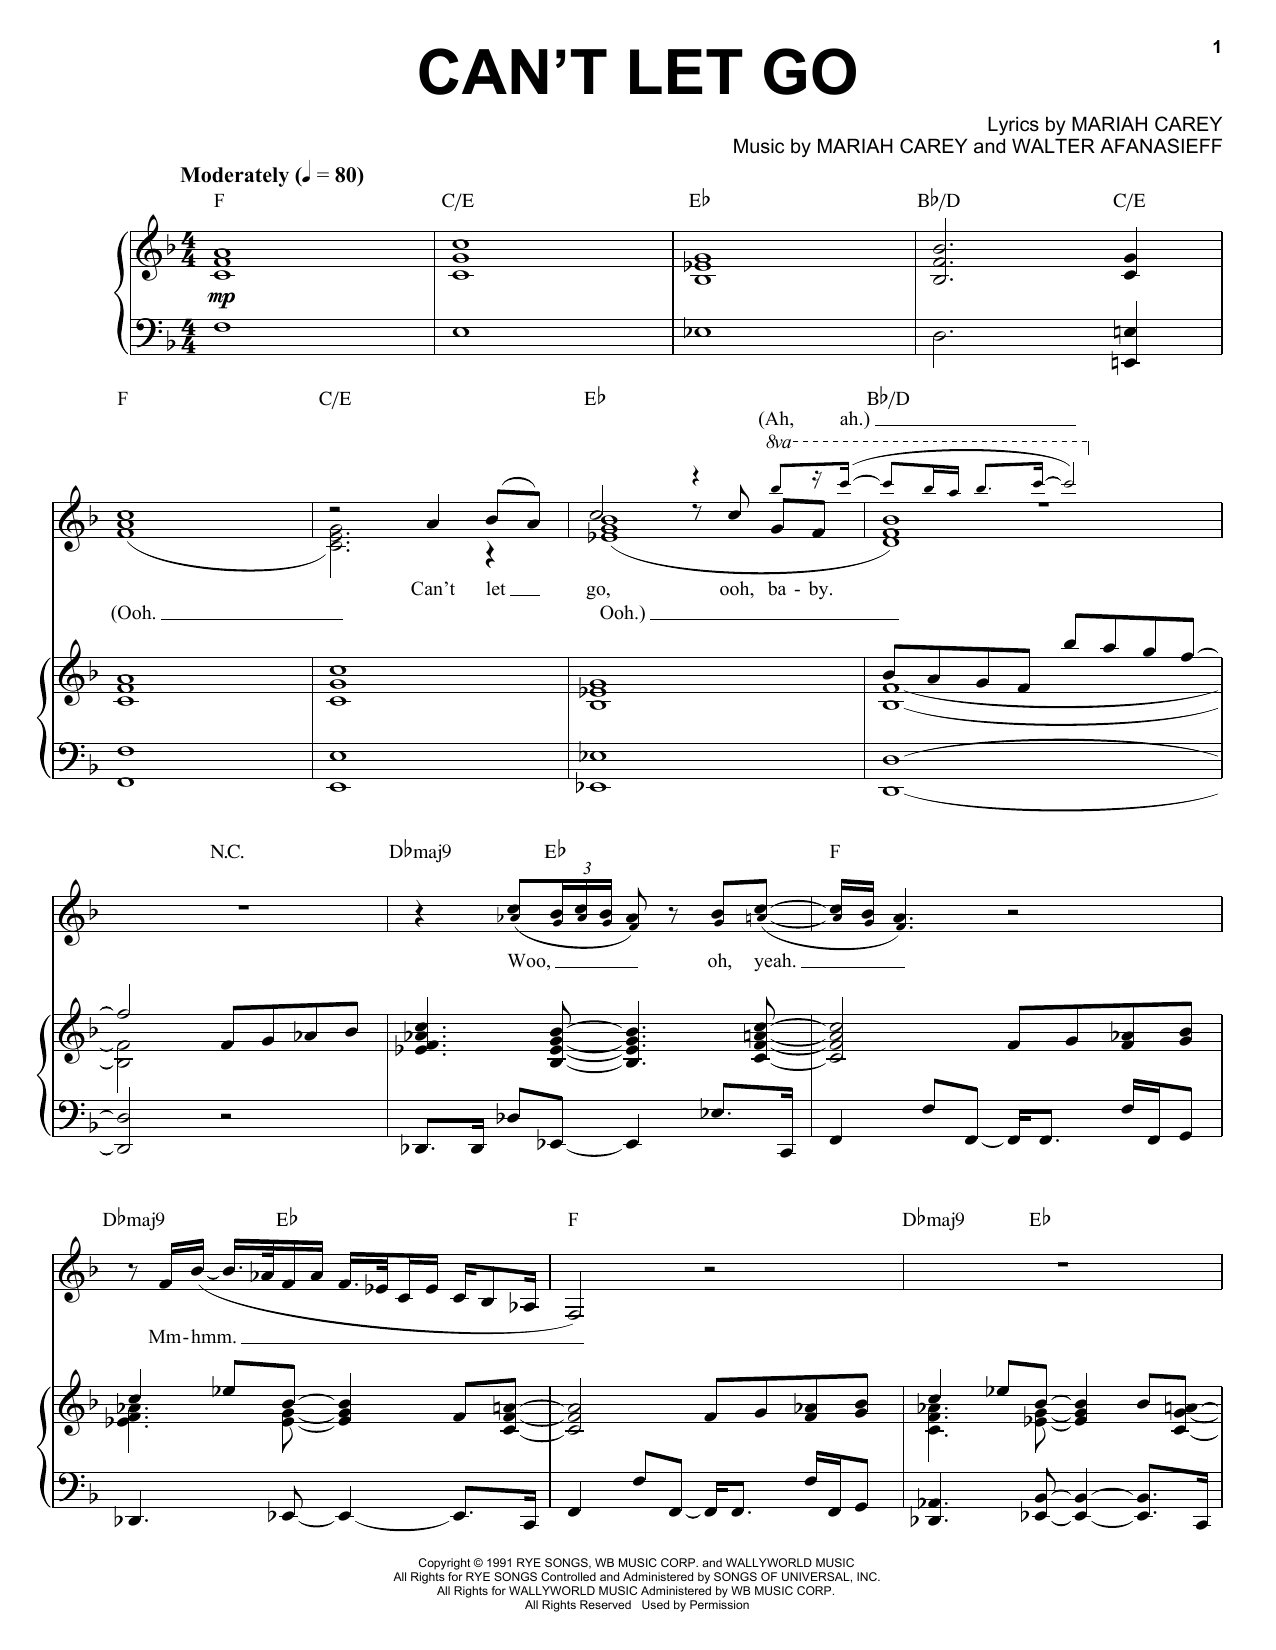 Download Mariah Carey Can't Let Go Sheet Music